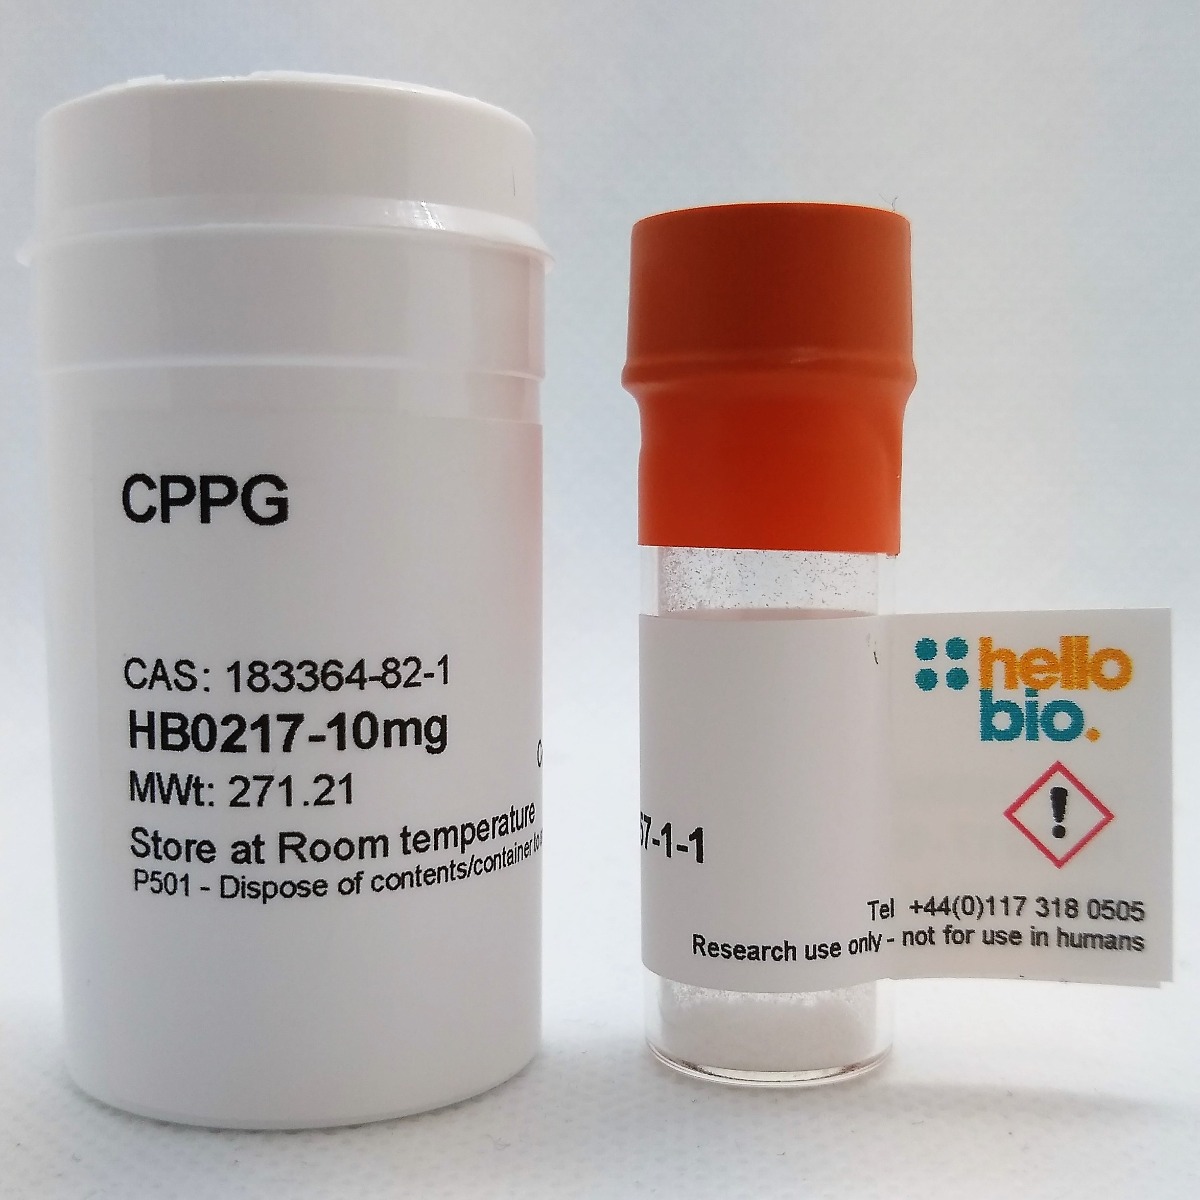 CPPG product vial image | Hello Bio